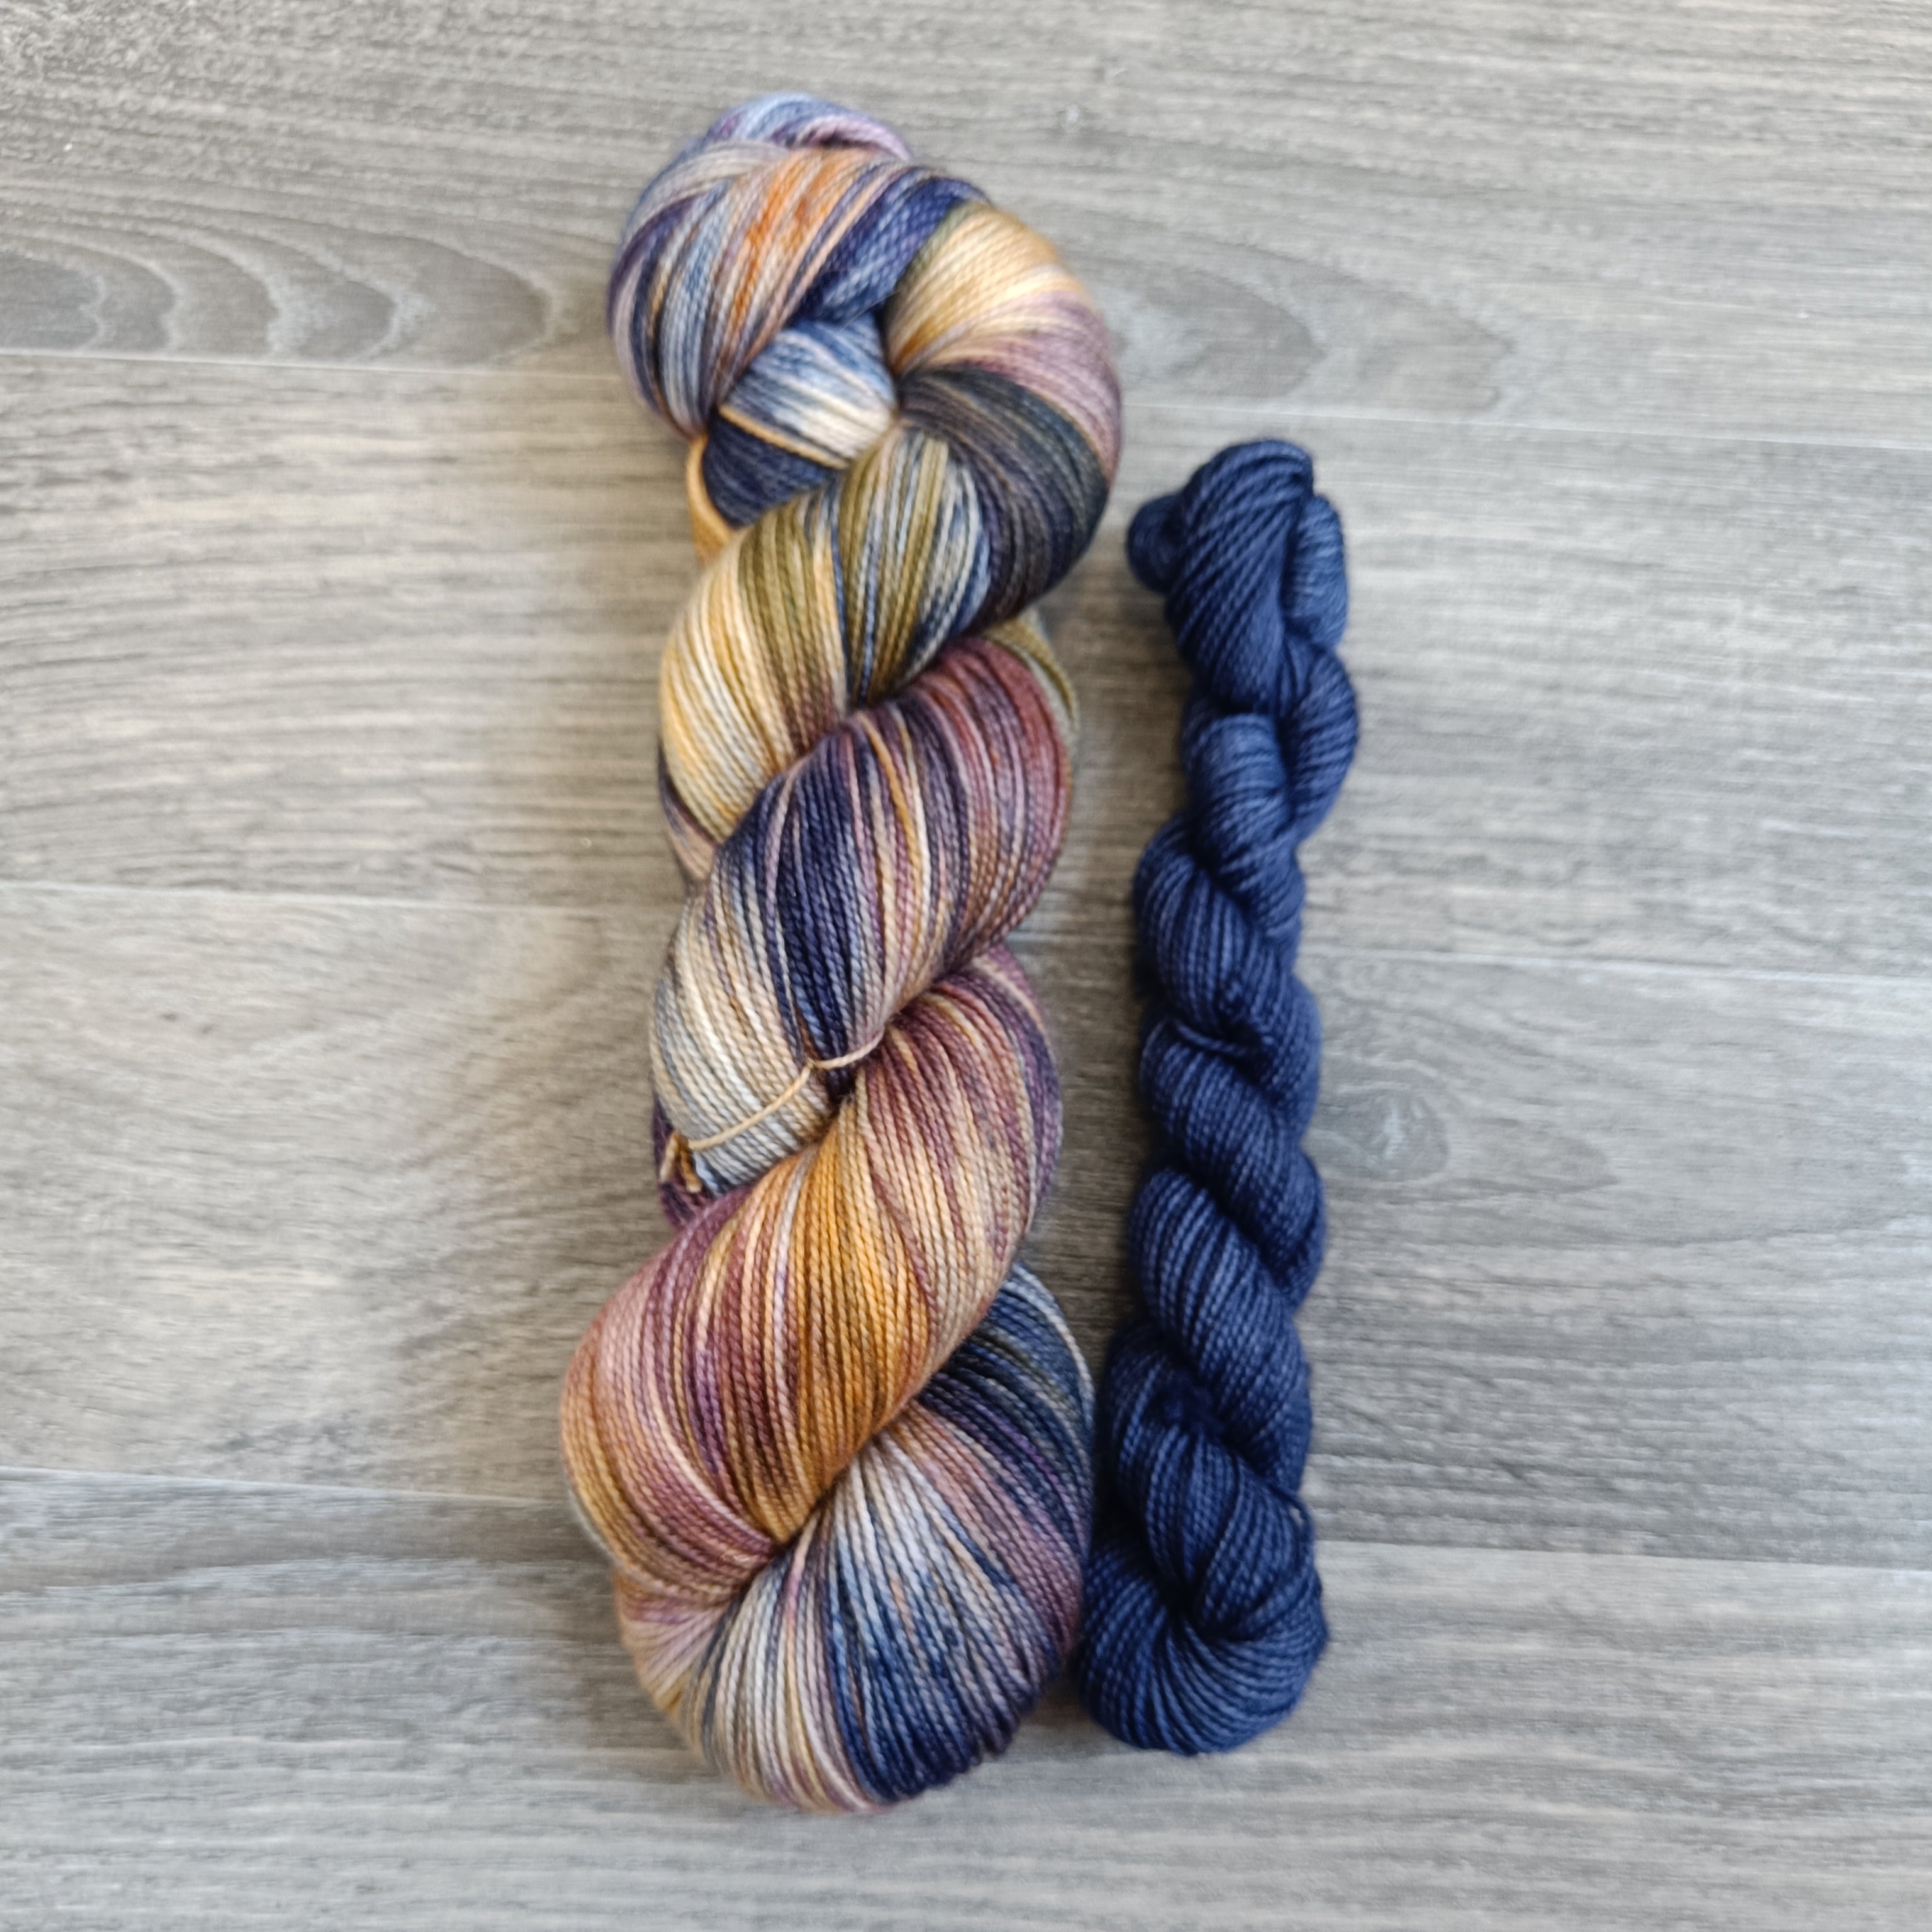 Skein of yarn in colourway Mystical Dreams with a co-ordinating  blue mini skein